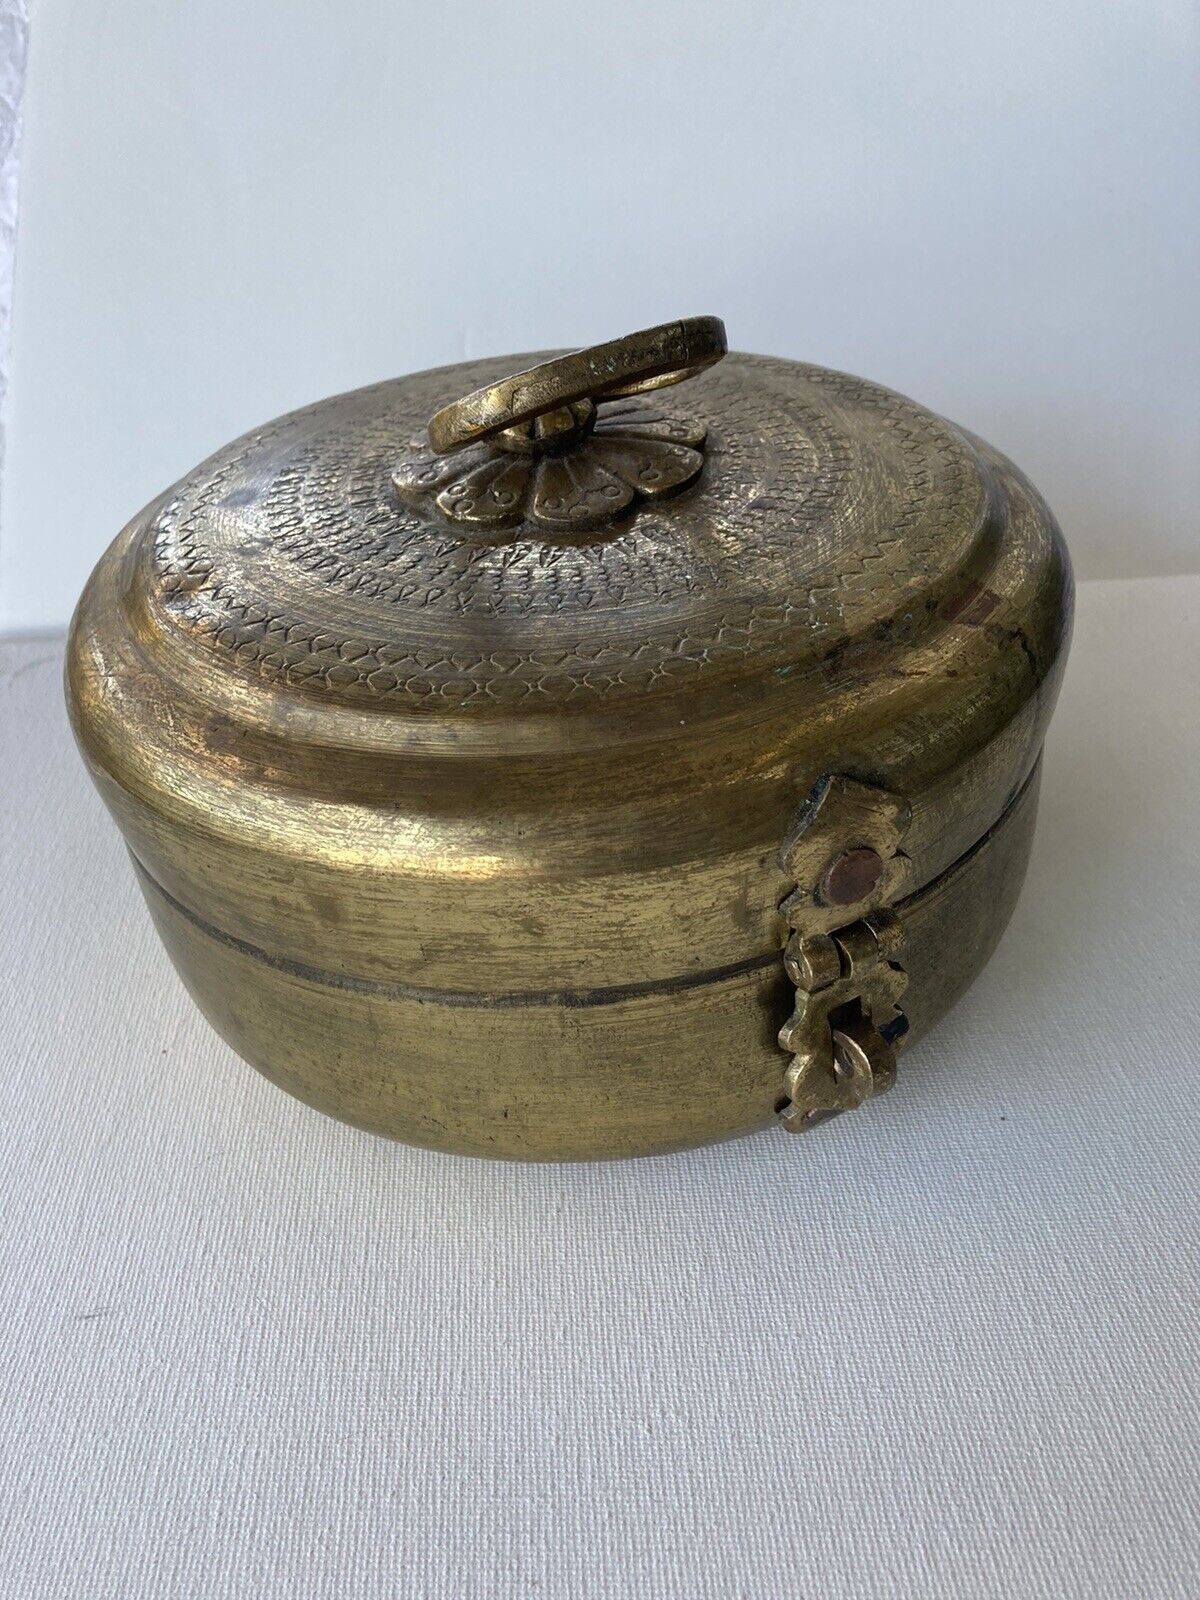 Vintage Brass Lunch Box/ Sewing Box / Home Decor